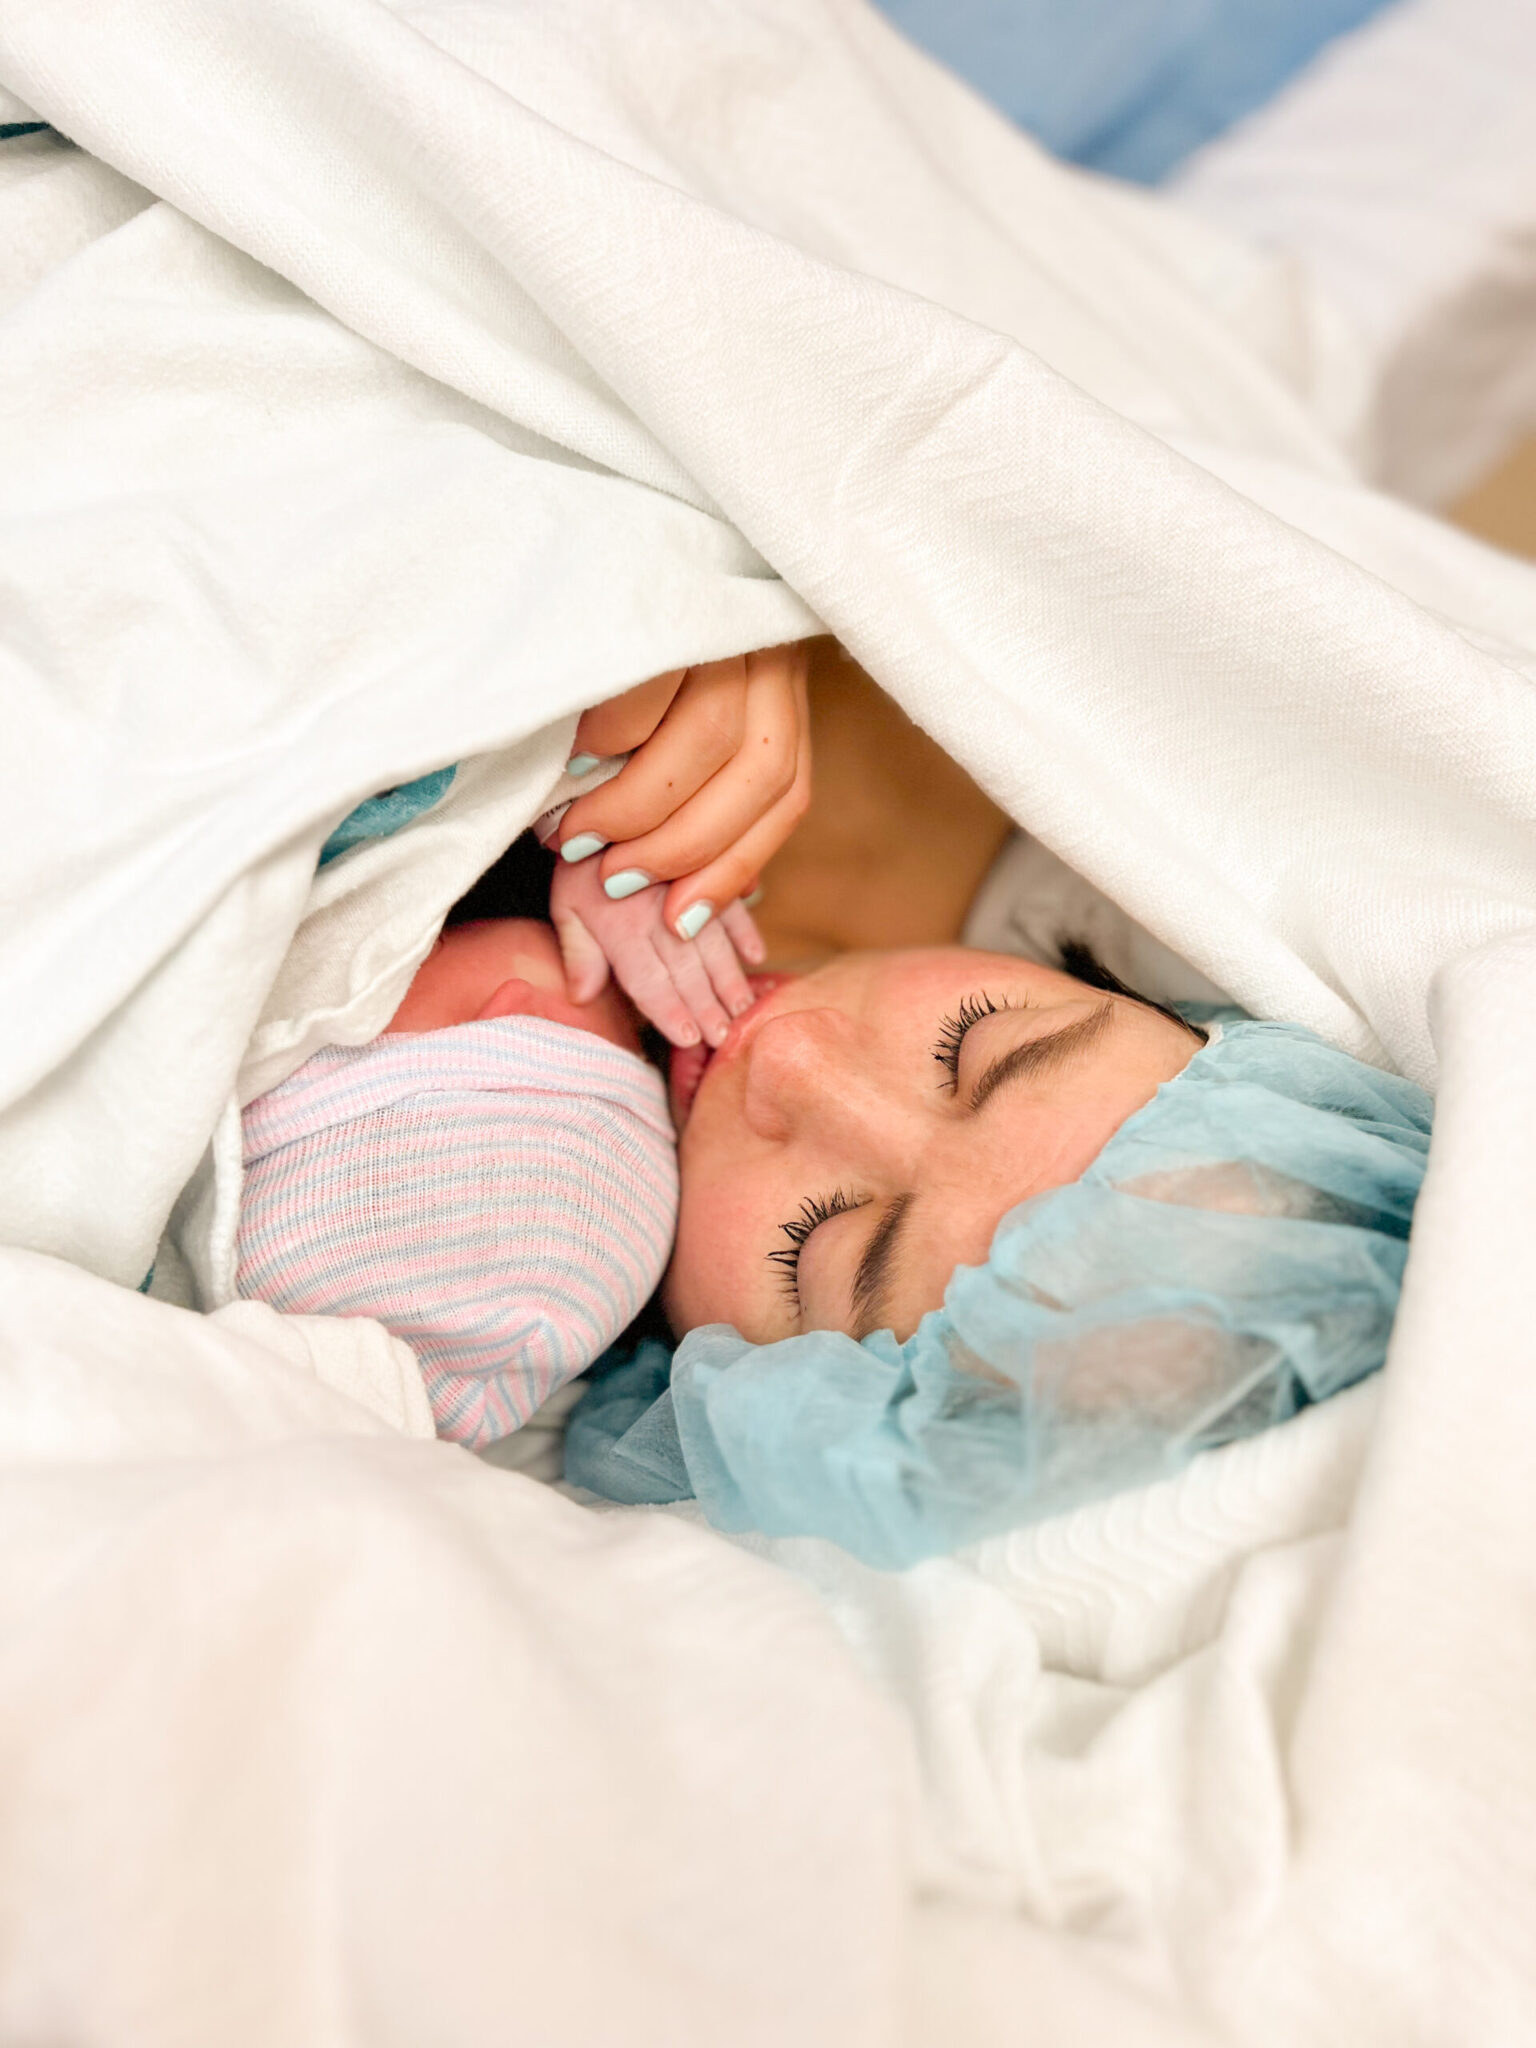 c-section birth delivery, beautiful c-section photos